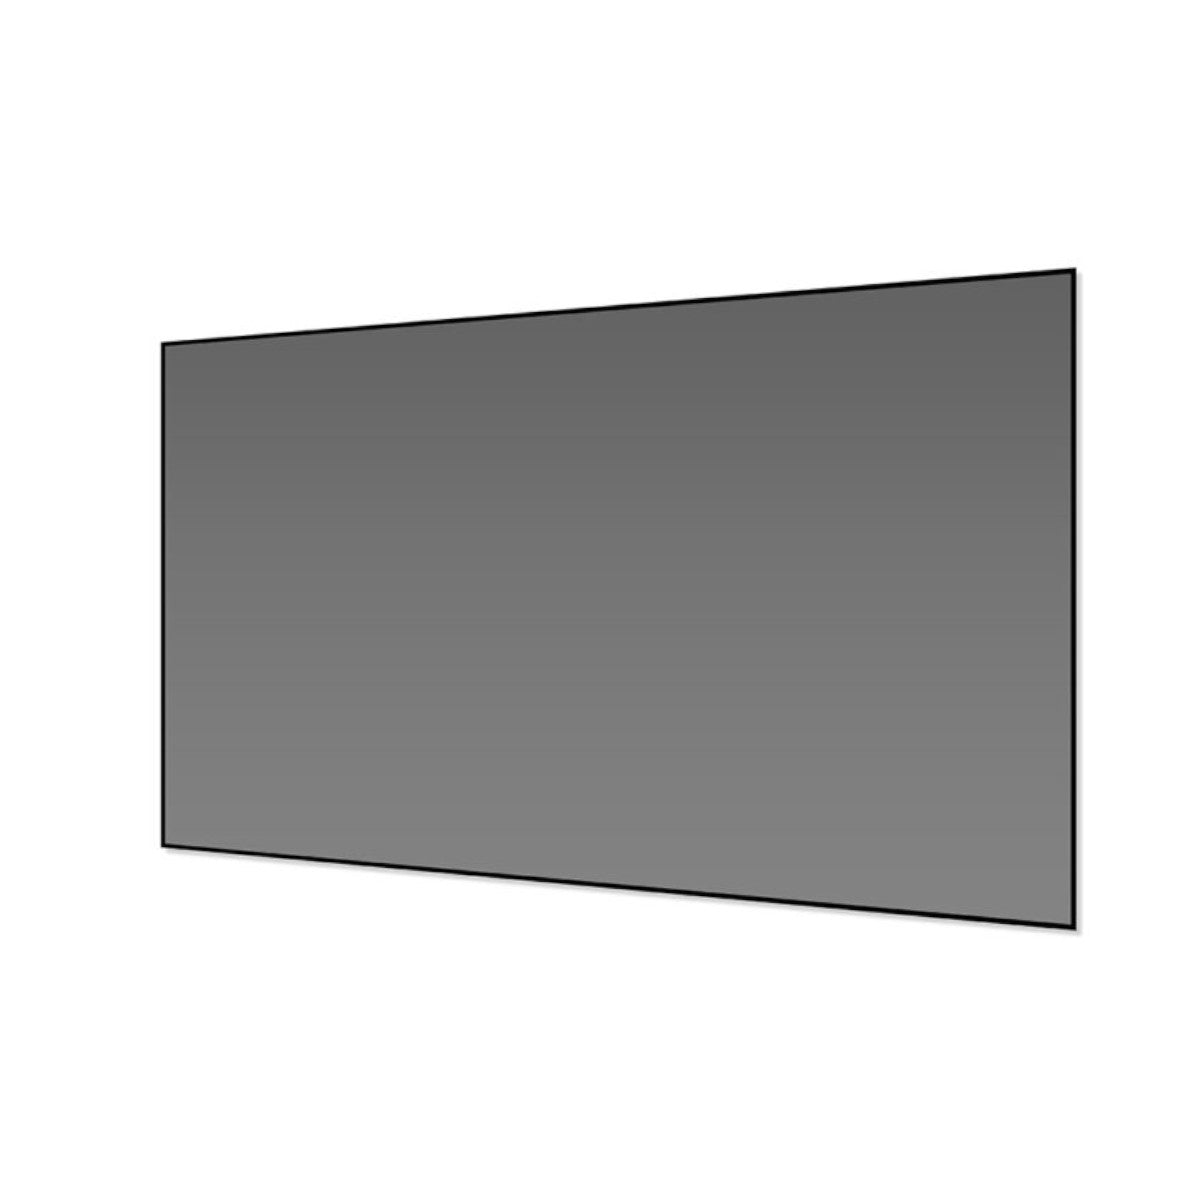 Elite Aeon CLR® 3 Series Edge Free (Ceiling Light Rejecting®) 16:9 Fixed Frame Projector Screen